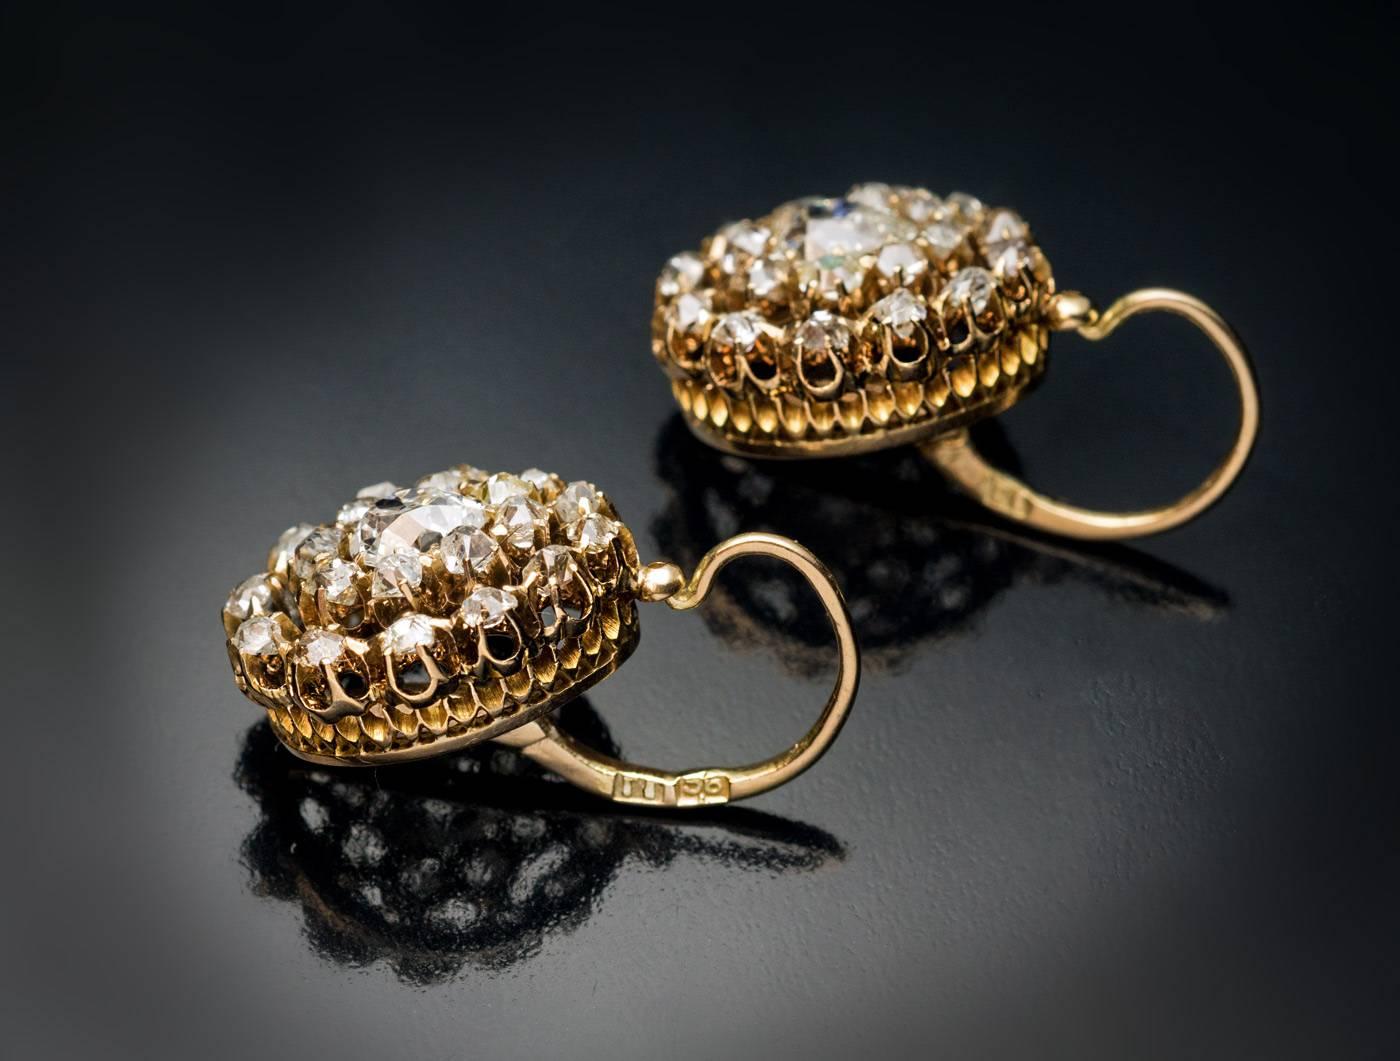 Antique Russian 14K gold drop earrings are set with approximately 3 carats of sparkling bright white old cut diamonds.

Each earring is centered with an old pear cut diamond surrounded by two rows of graduating old mine cut diamonds. The pear cut